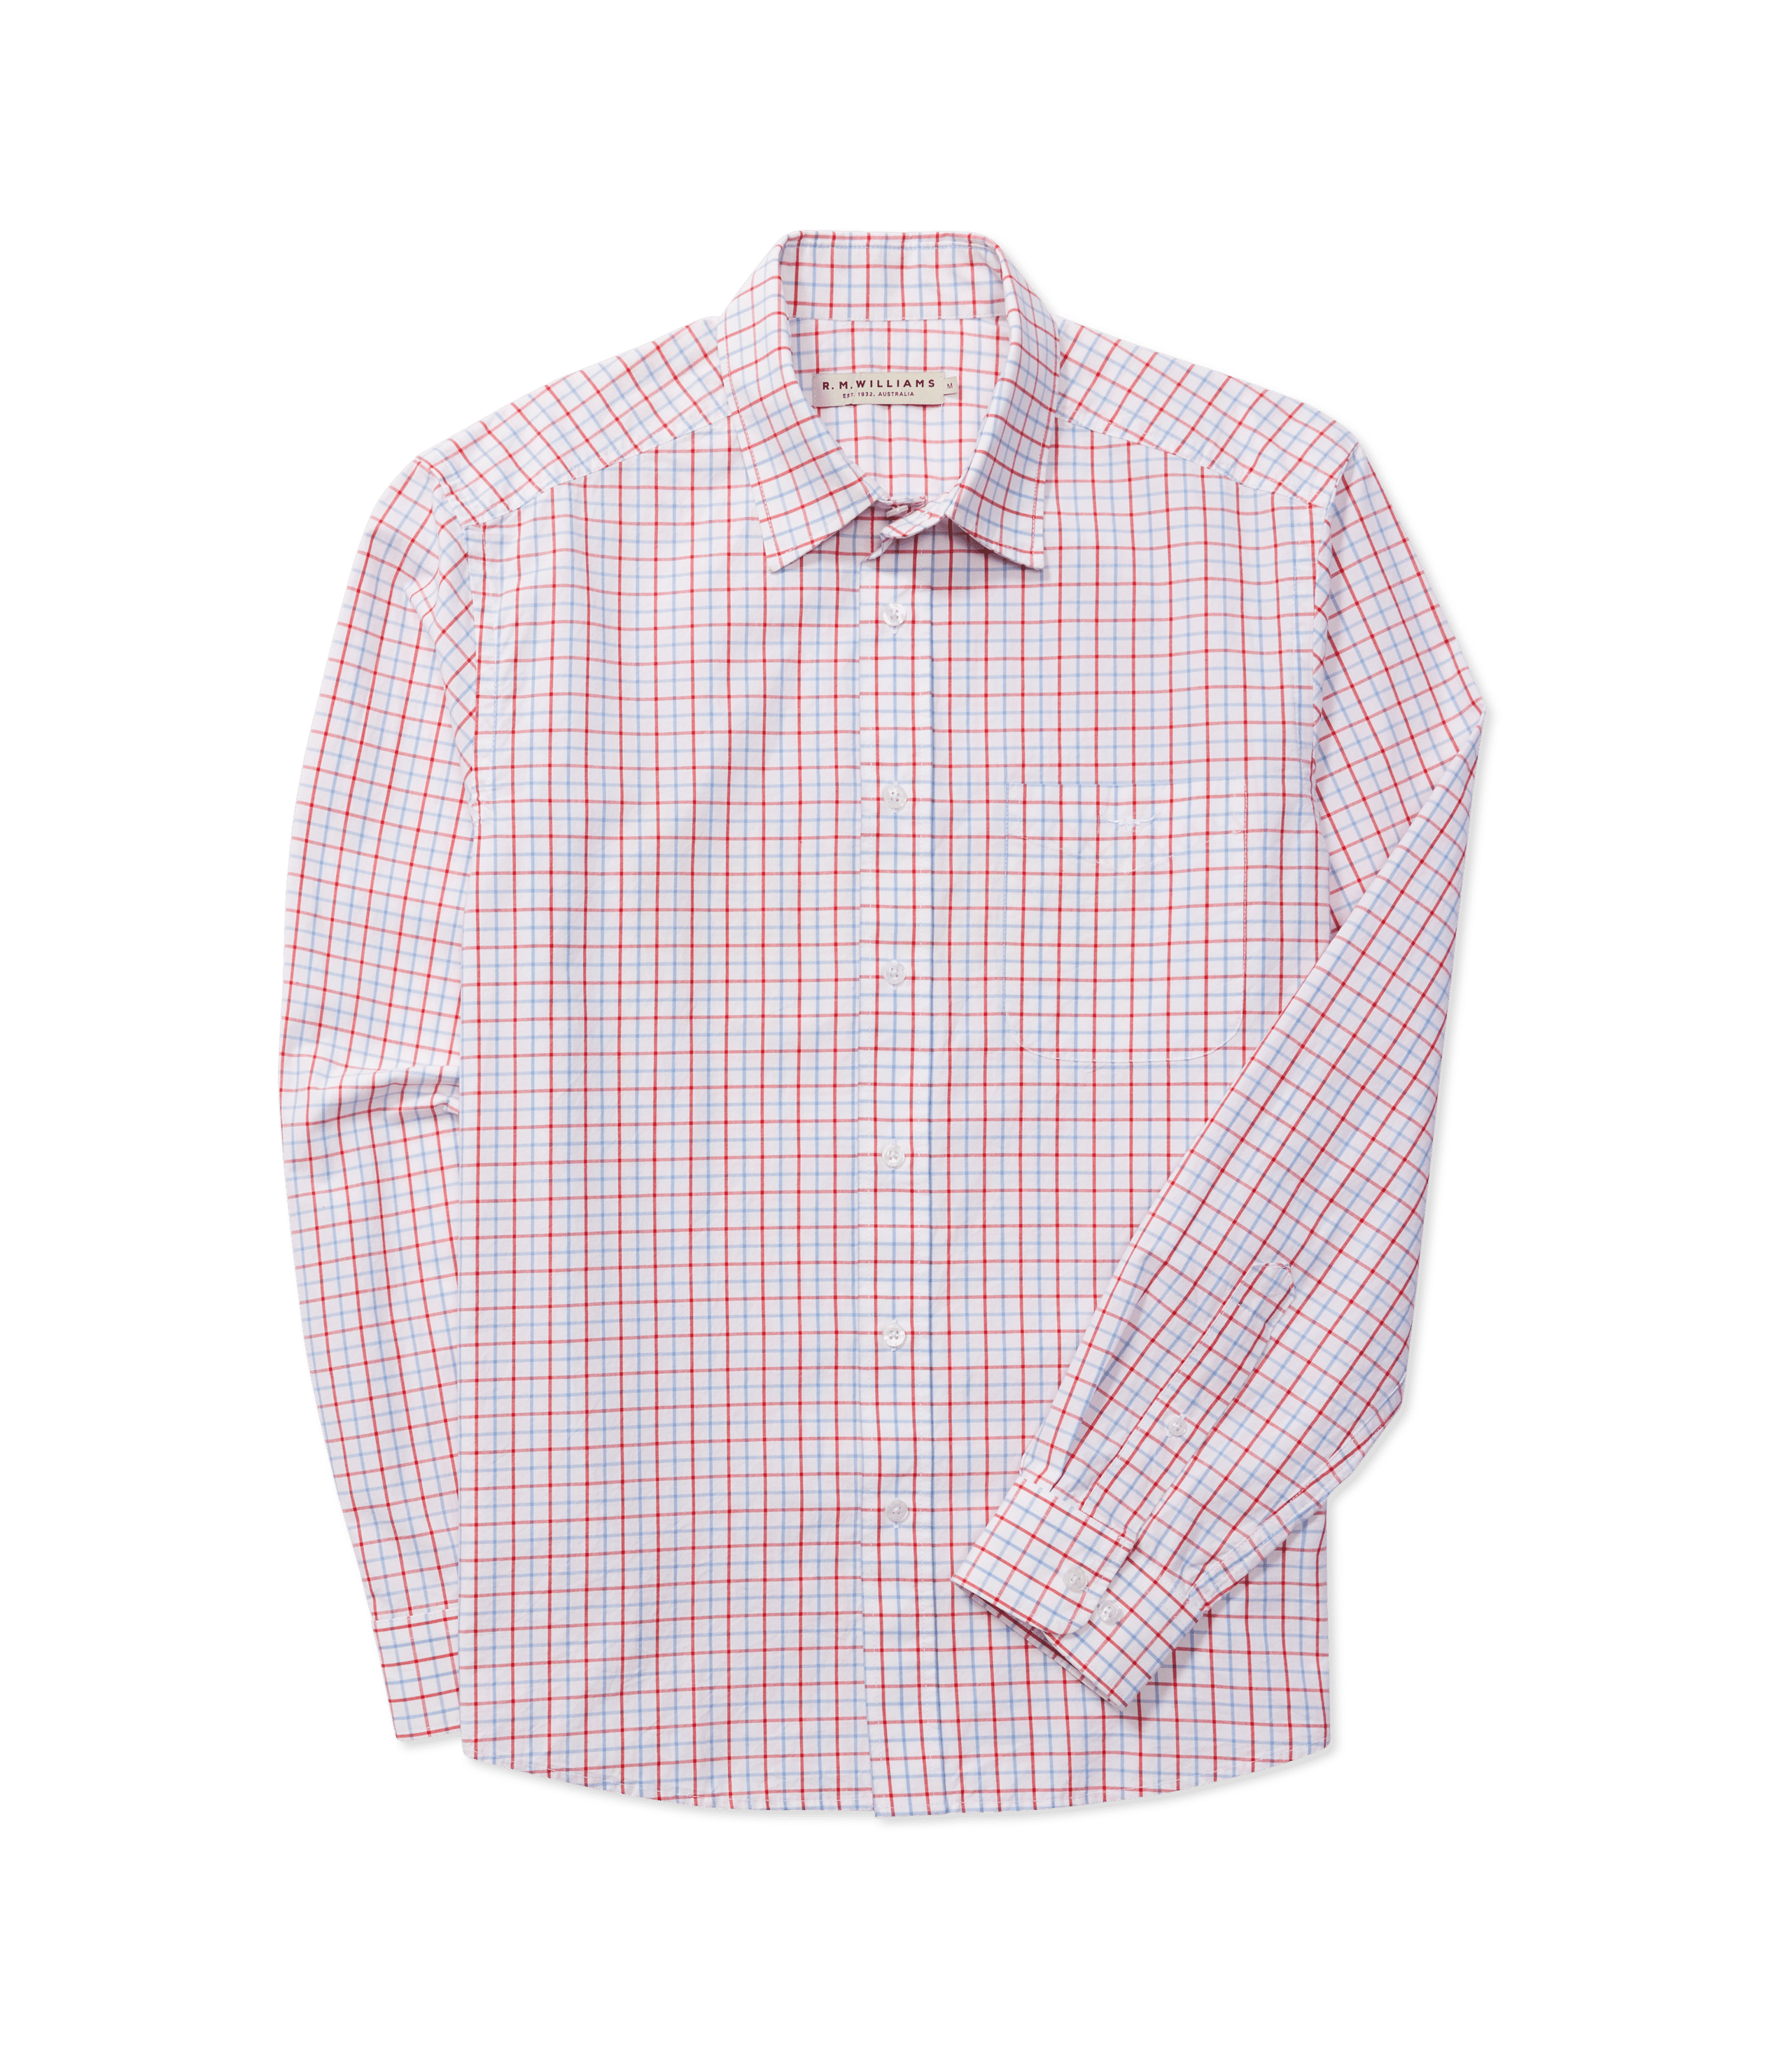 Classic Shirt – Blue/White/Red